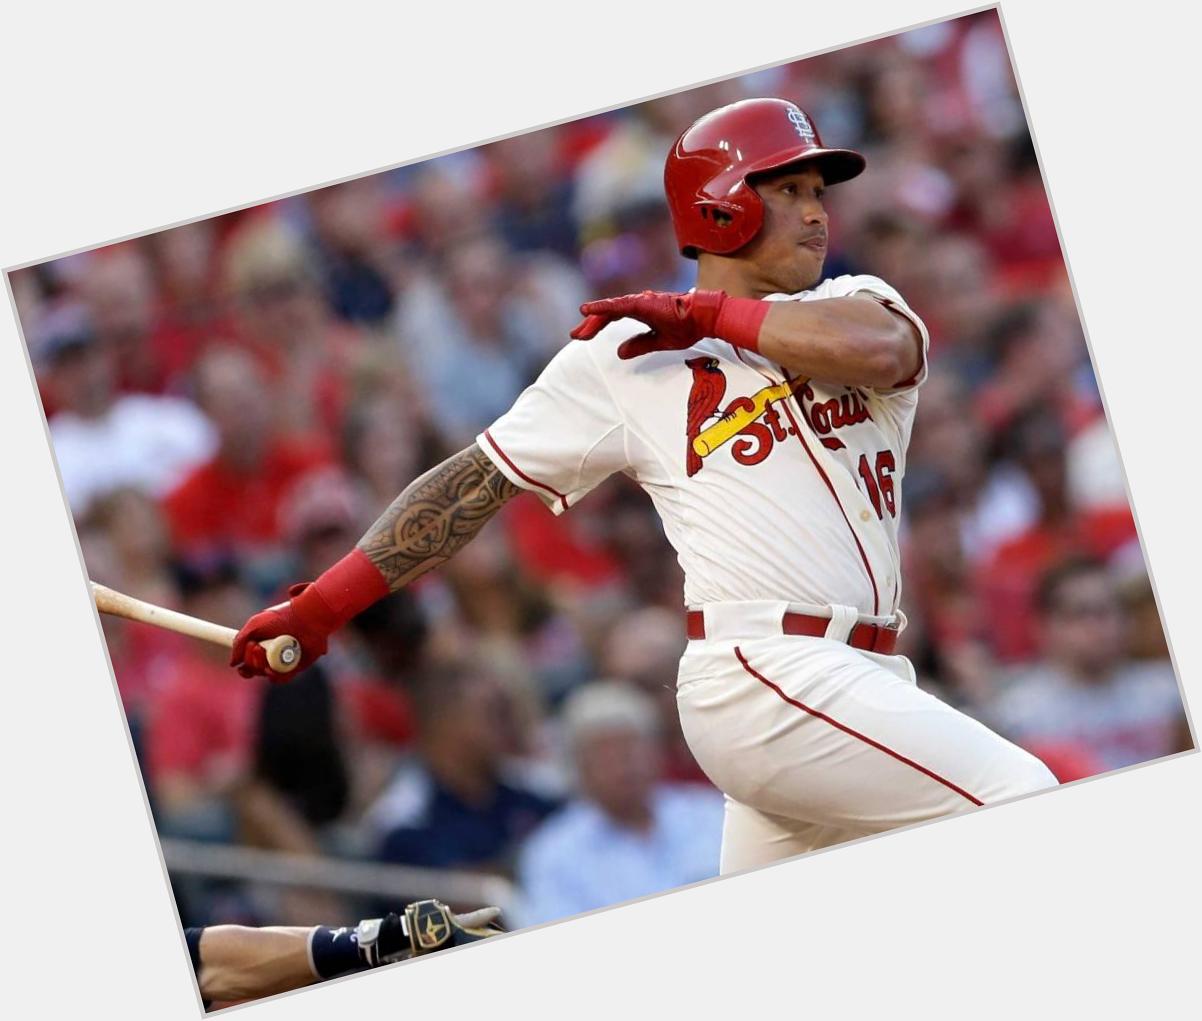 Happy birthday to Kolten Wong, who wants to get back to the World Series 